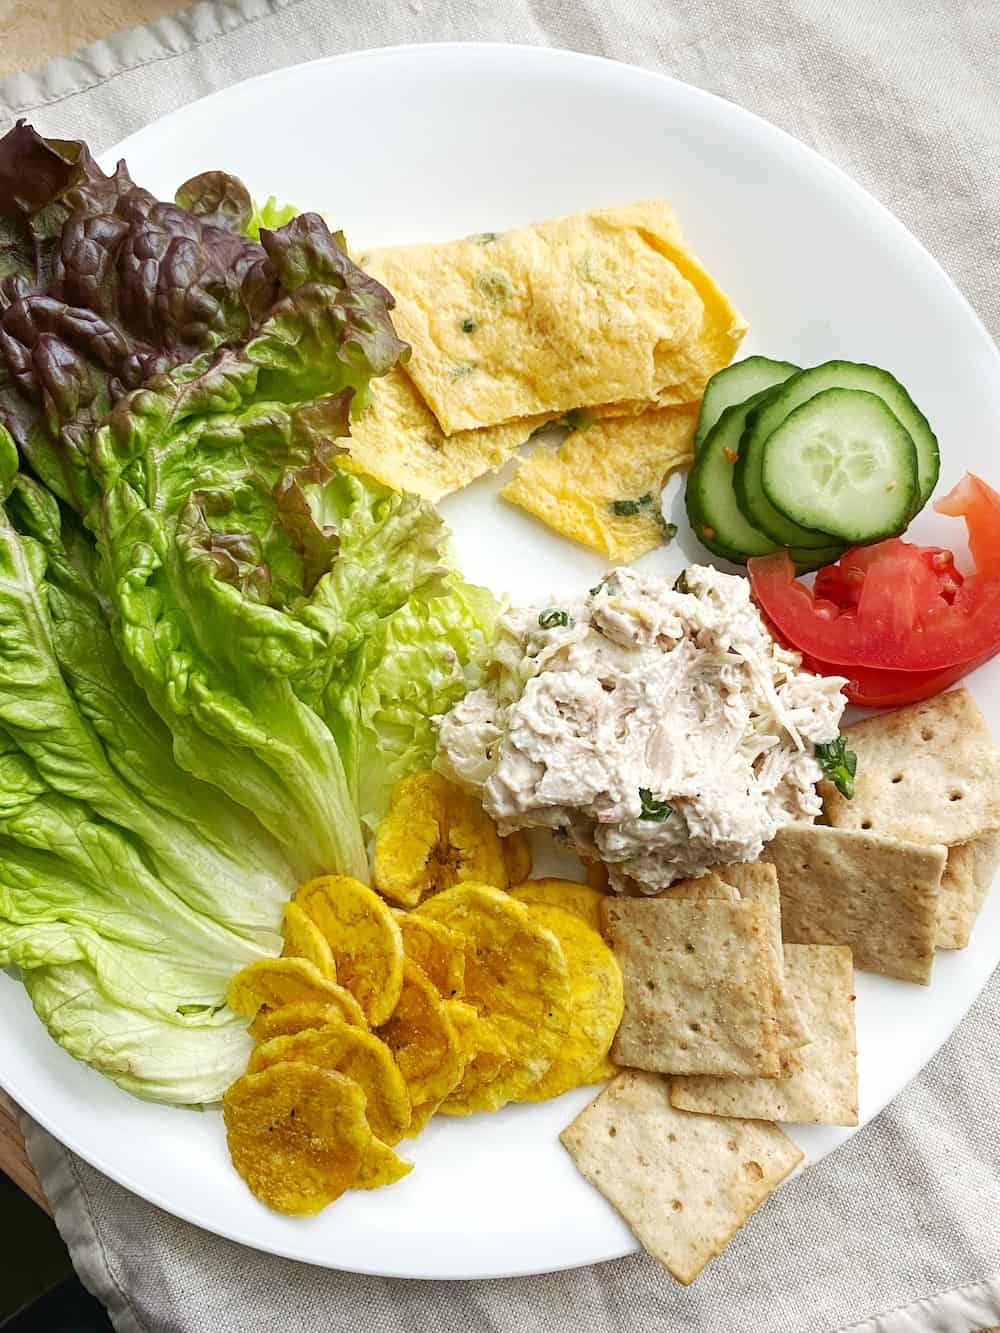 A plate with vegetables, chips, crackers and chicken sandwich spread